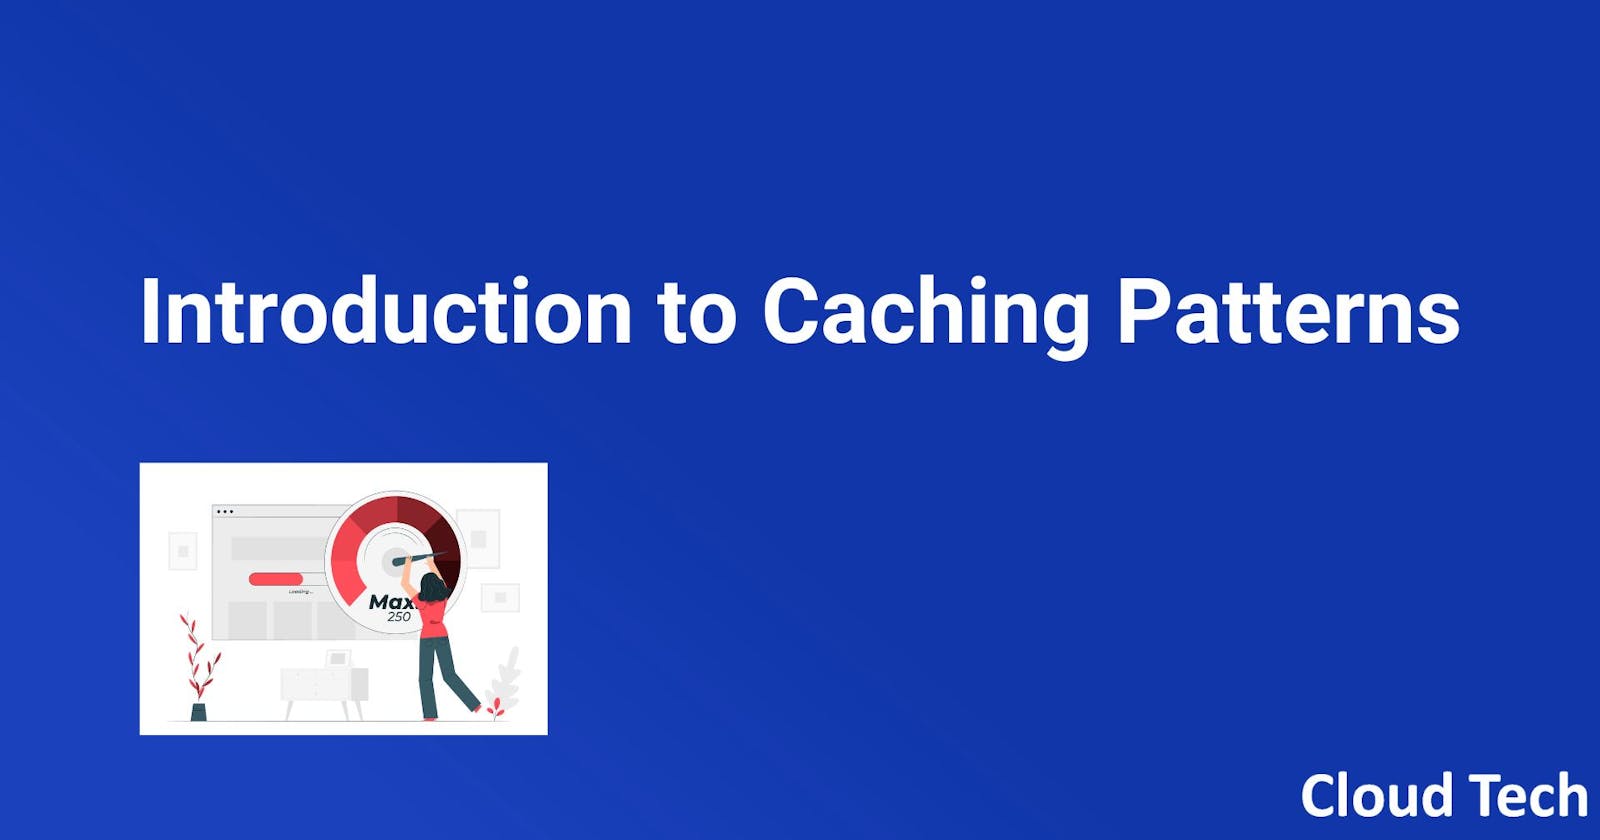 Introduction to Caching Patterns